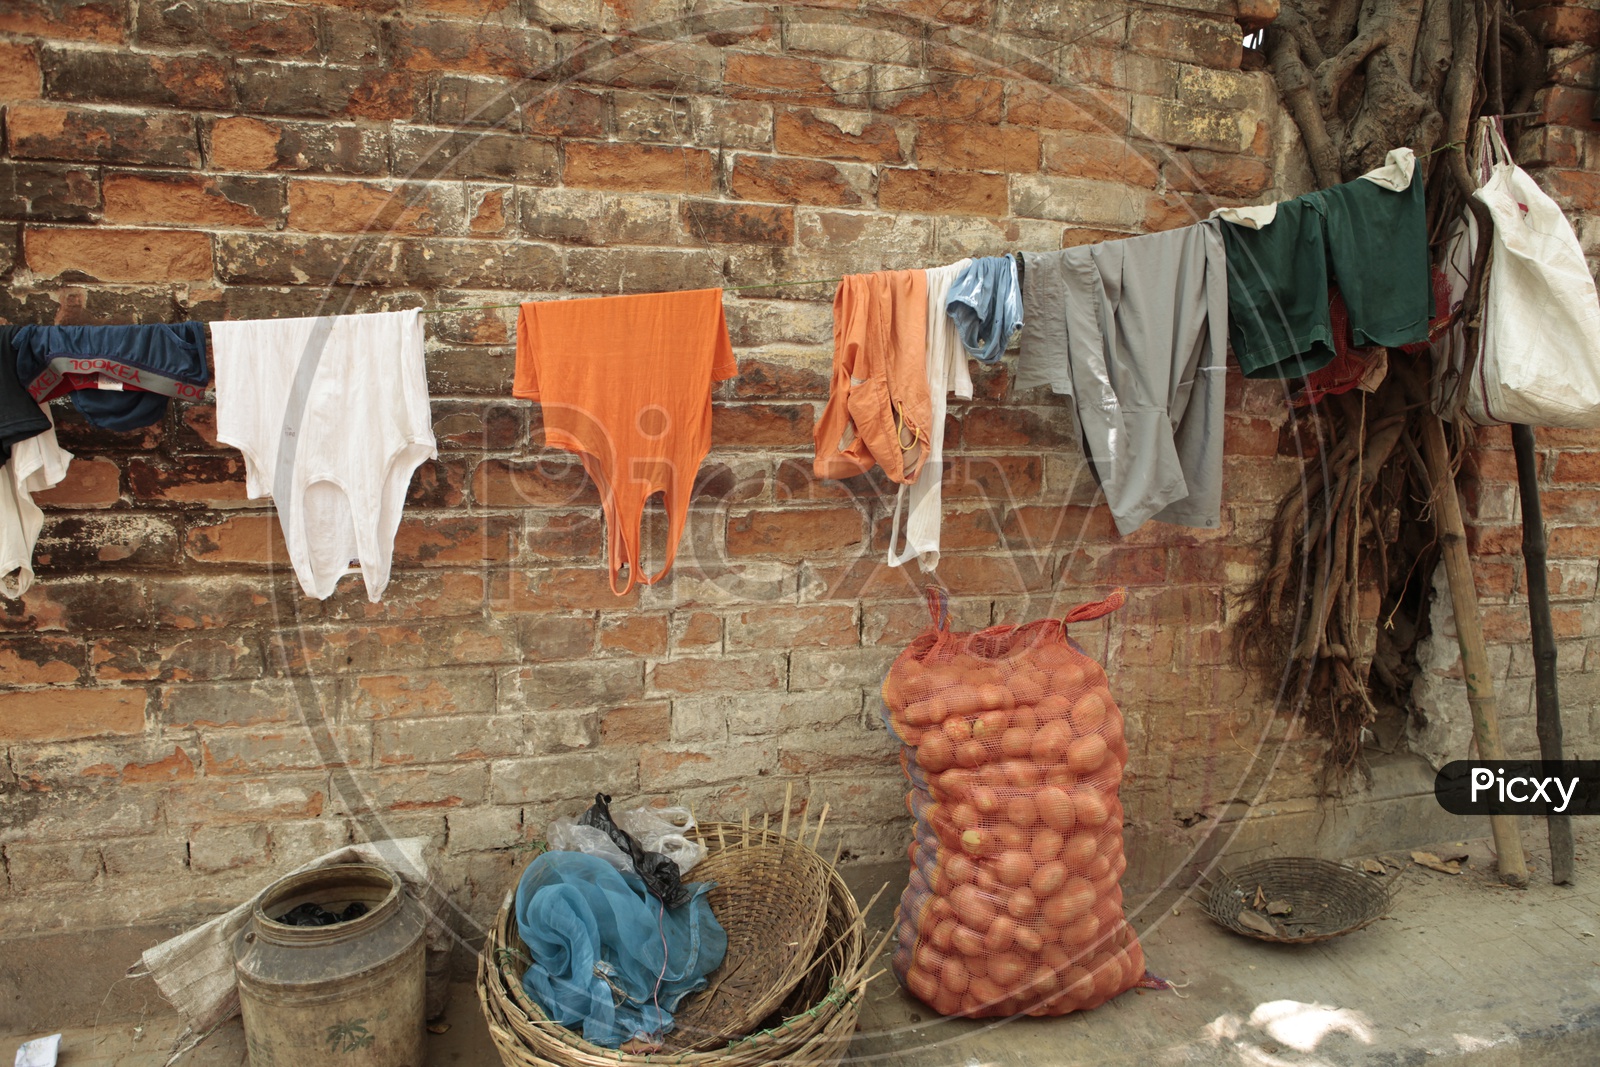 clothes on a string to dry on sun